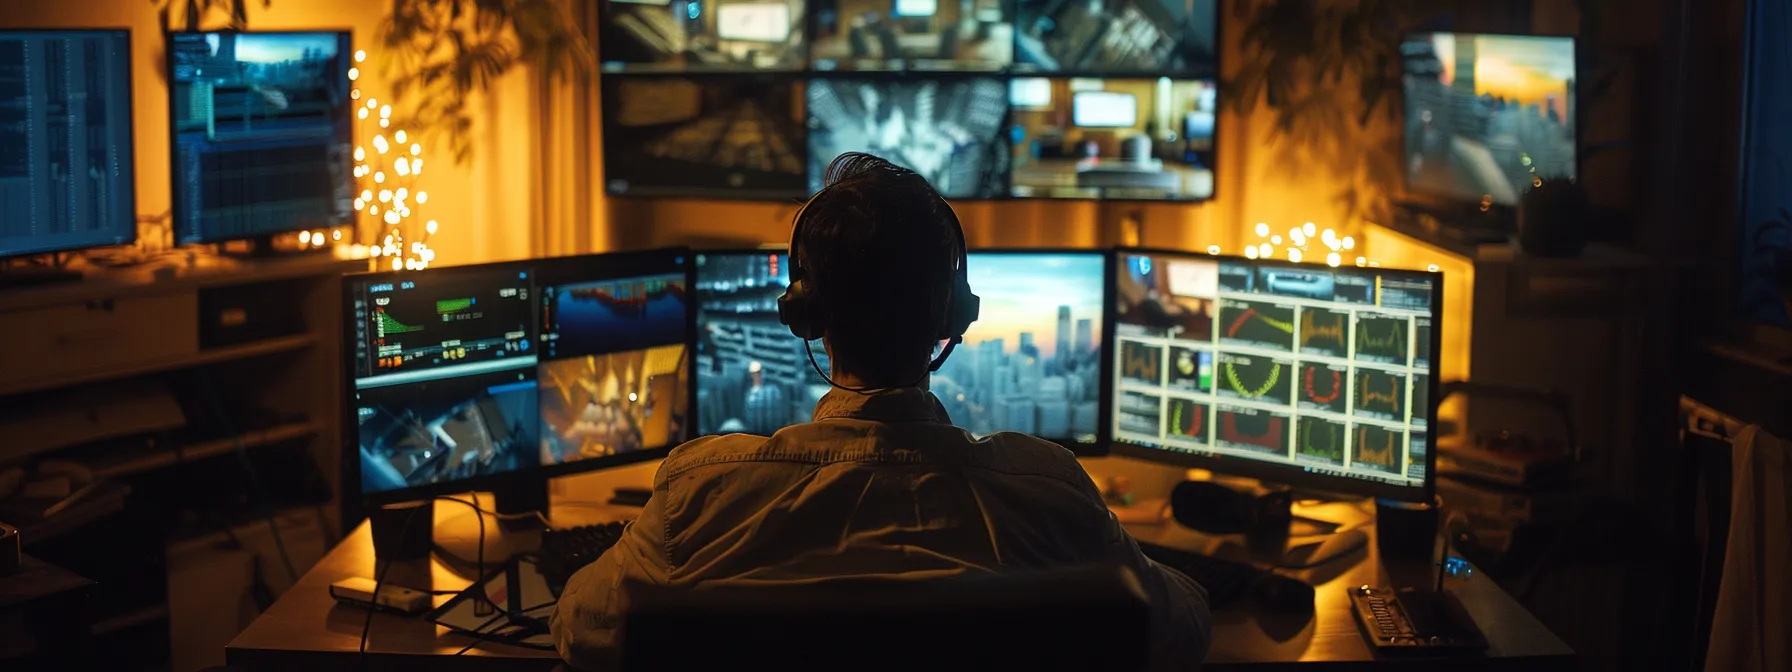 a person closely monitoring multiple screens for suspicious account activity.